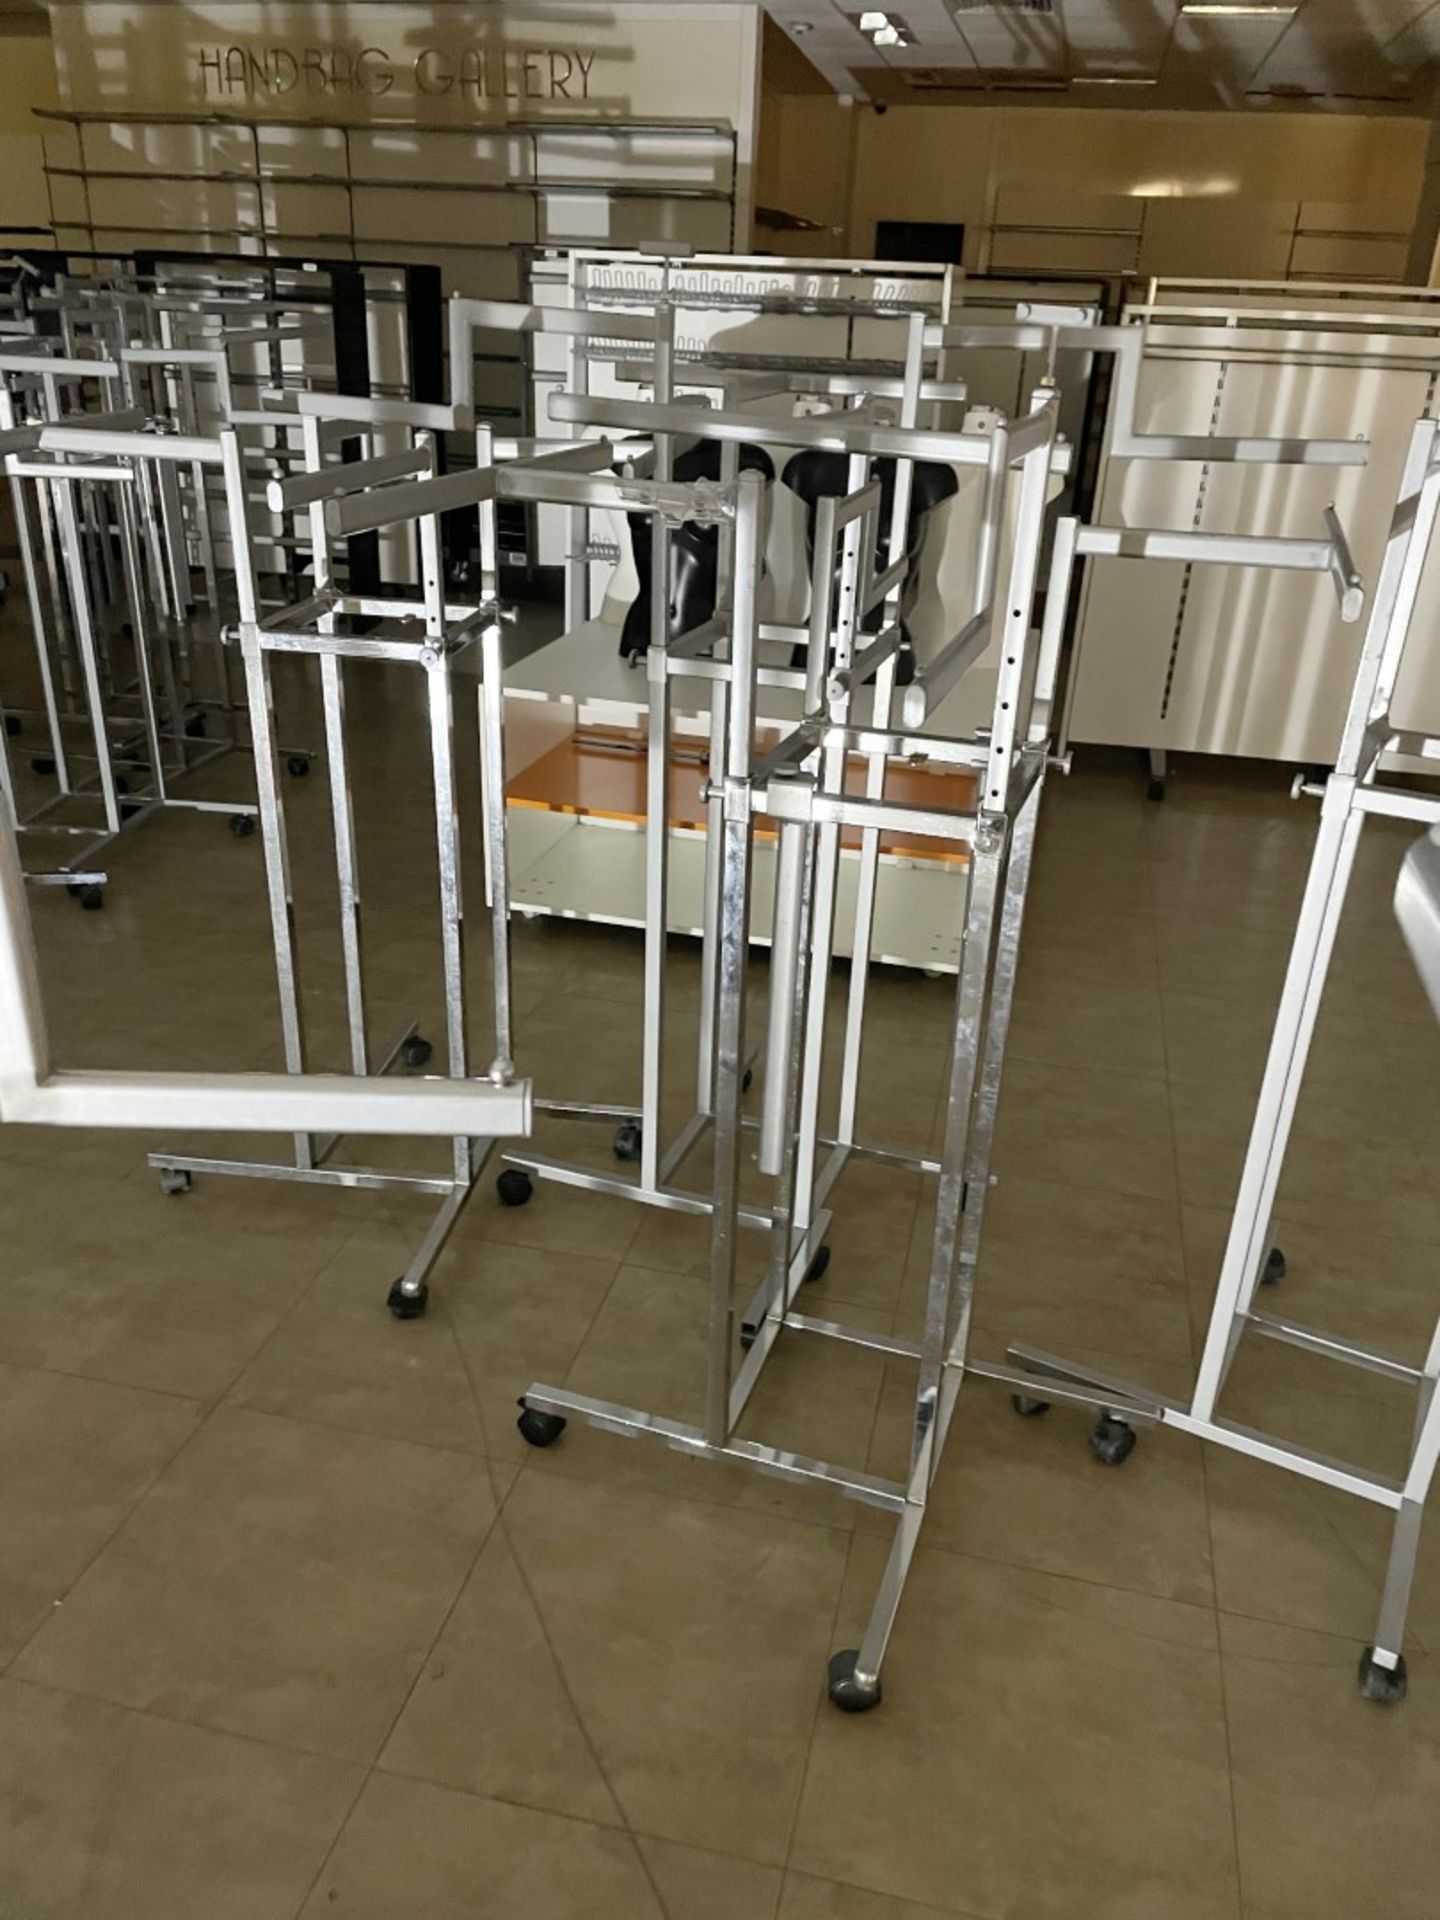 10 x Retail Display Clothes Rails Stands With Four Stepped Arm Rails - CL670 - Ref: GEM247A - - Image 10 of 12